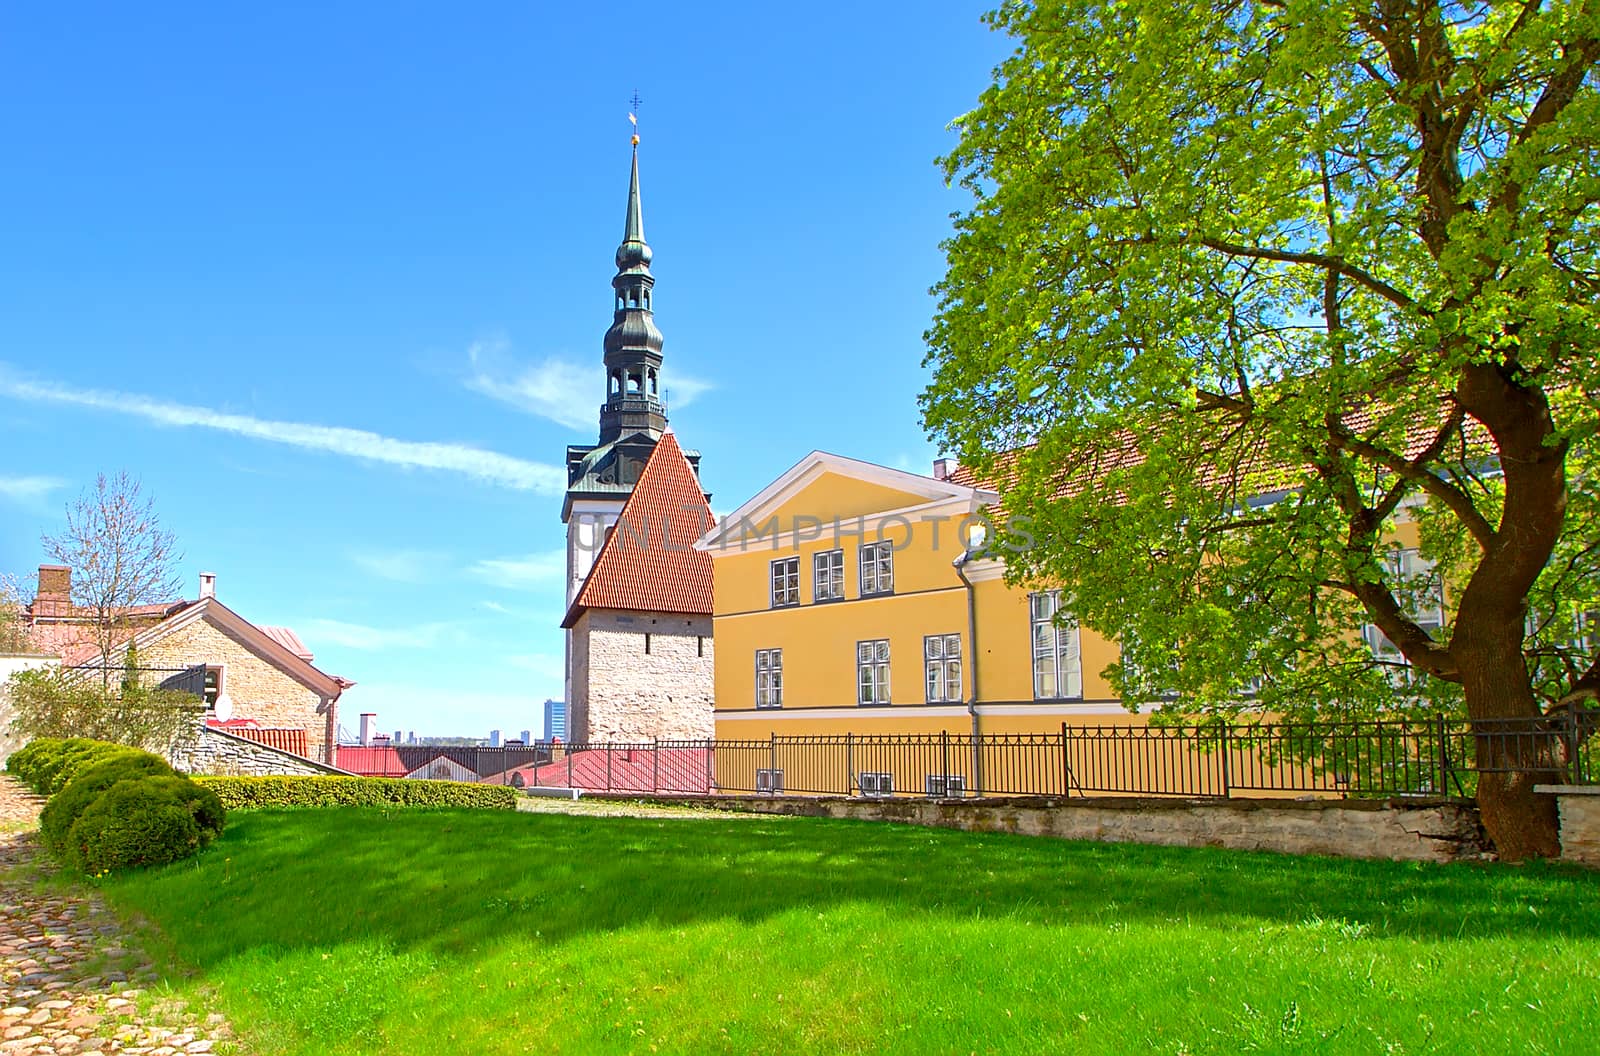 Old historic house and tower of a church in Old Town Tallinn. Beautiful sunny day with high contrast of green, yellow and blue.